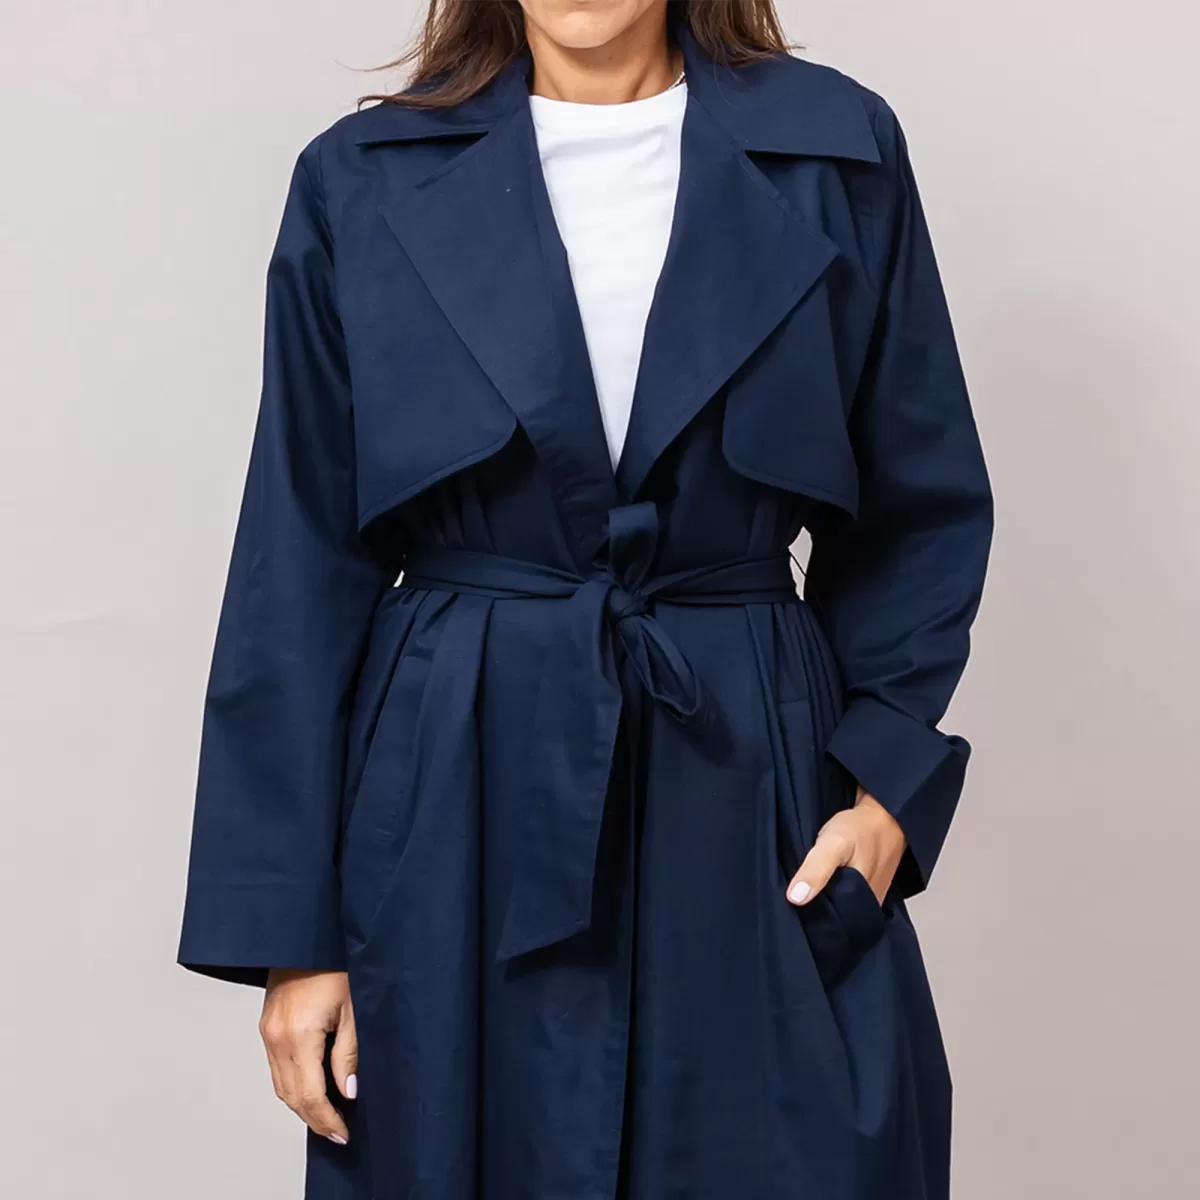 Duster Textured Cotton Navy Blue Coat with Gilet